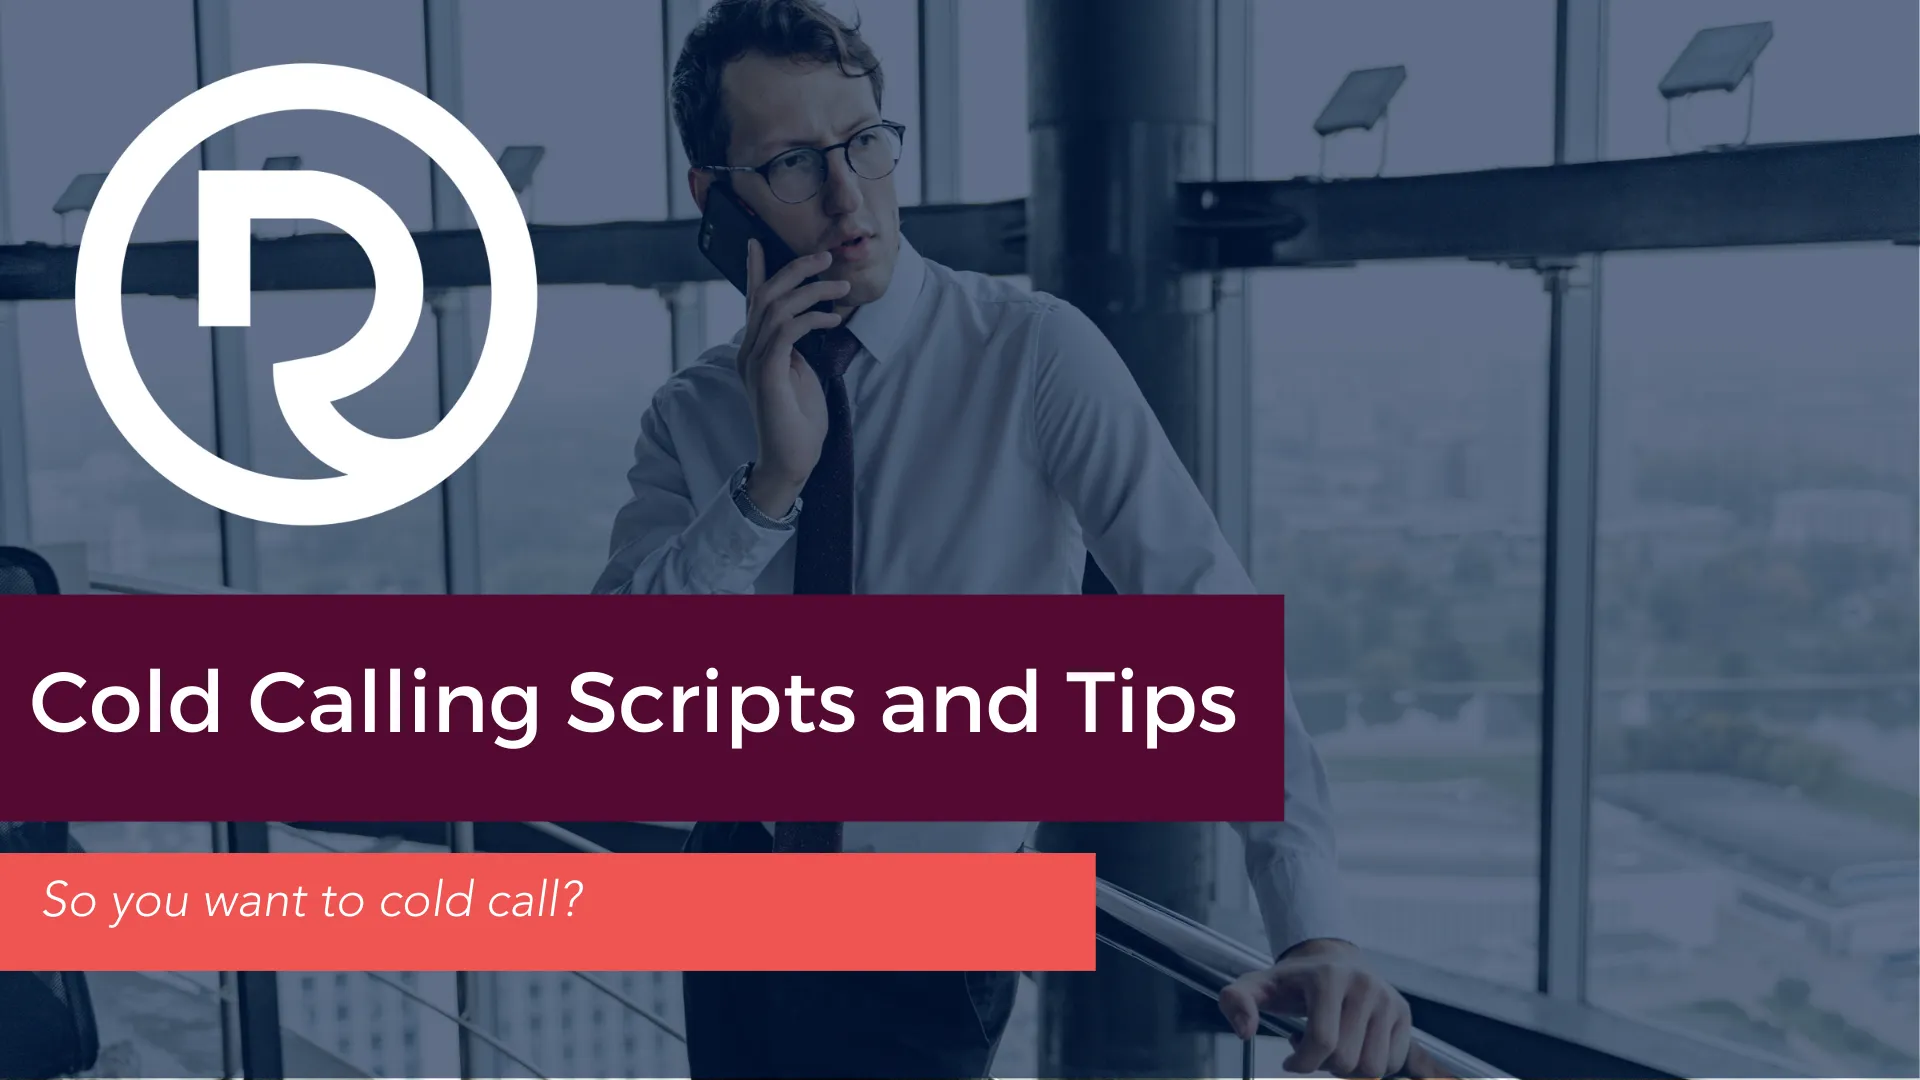 Cold Calling Tips and Tricks